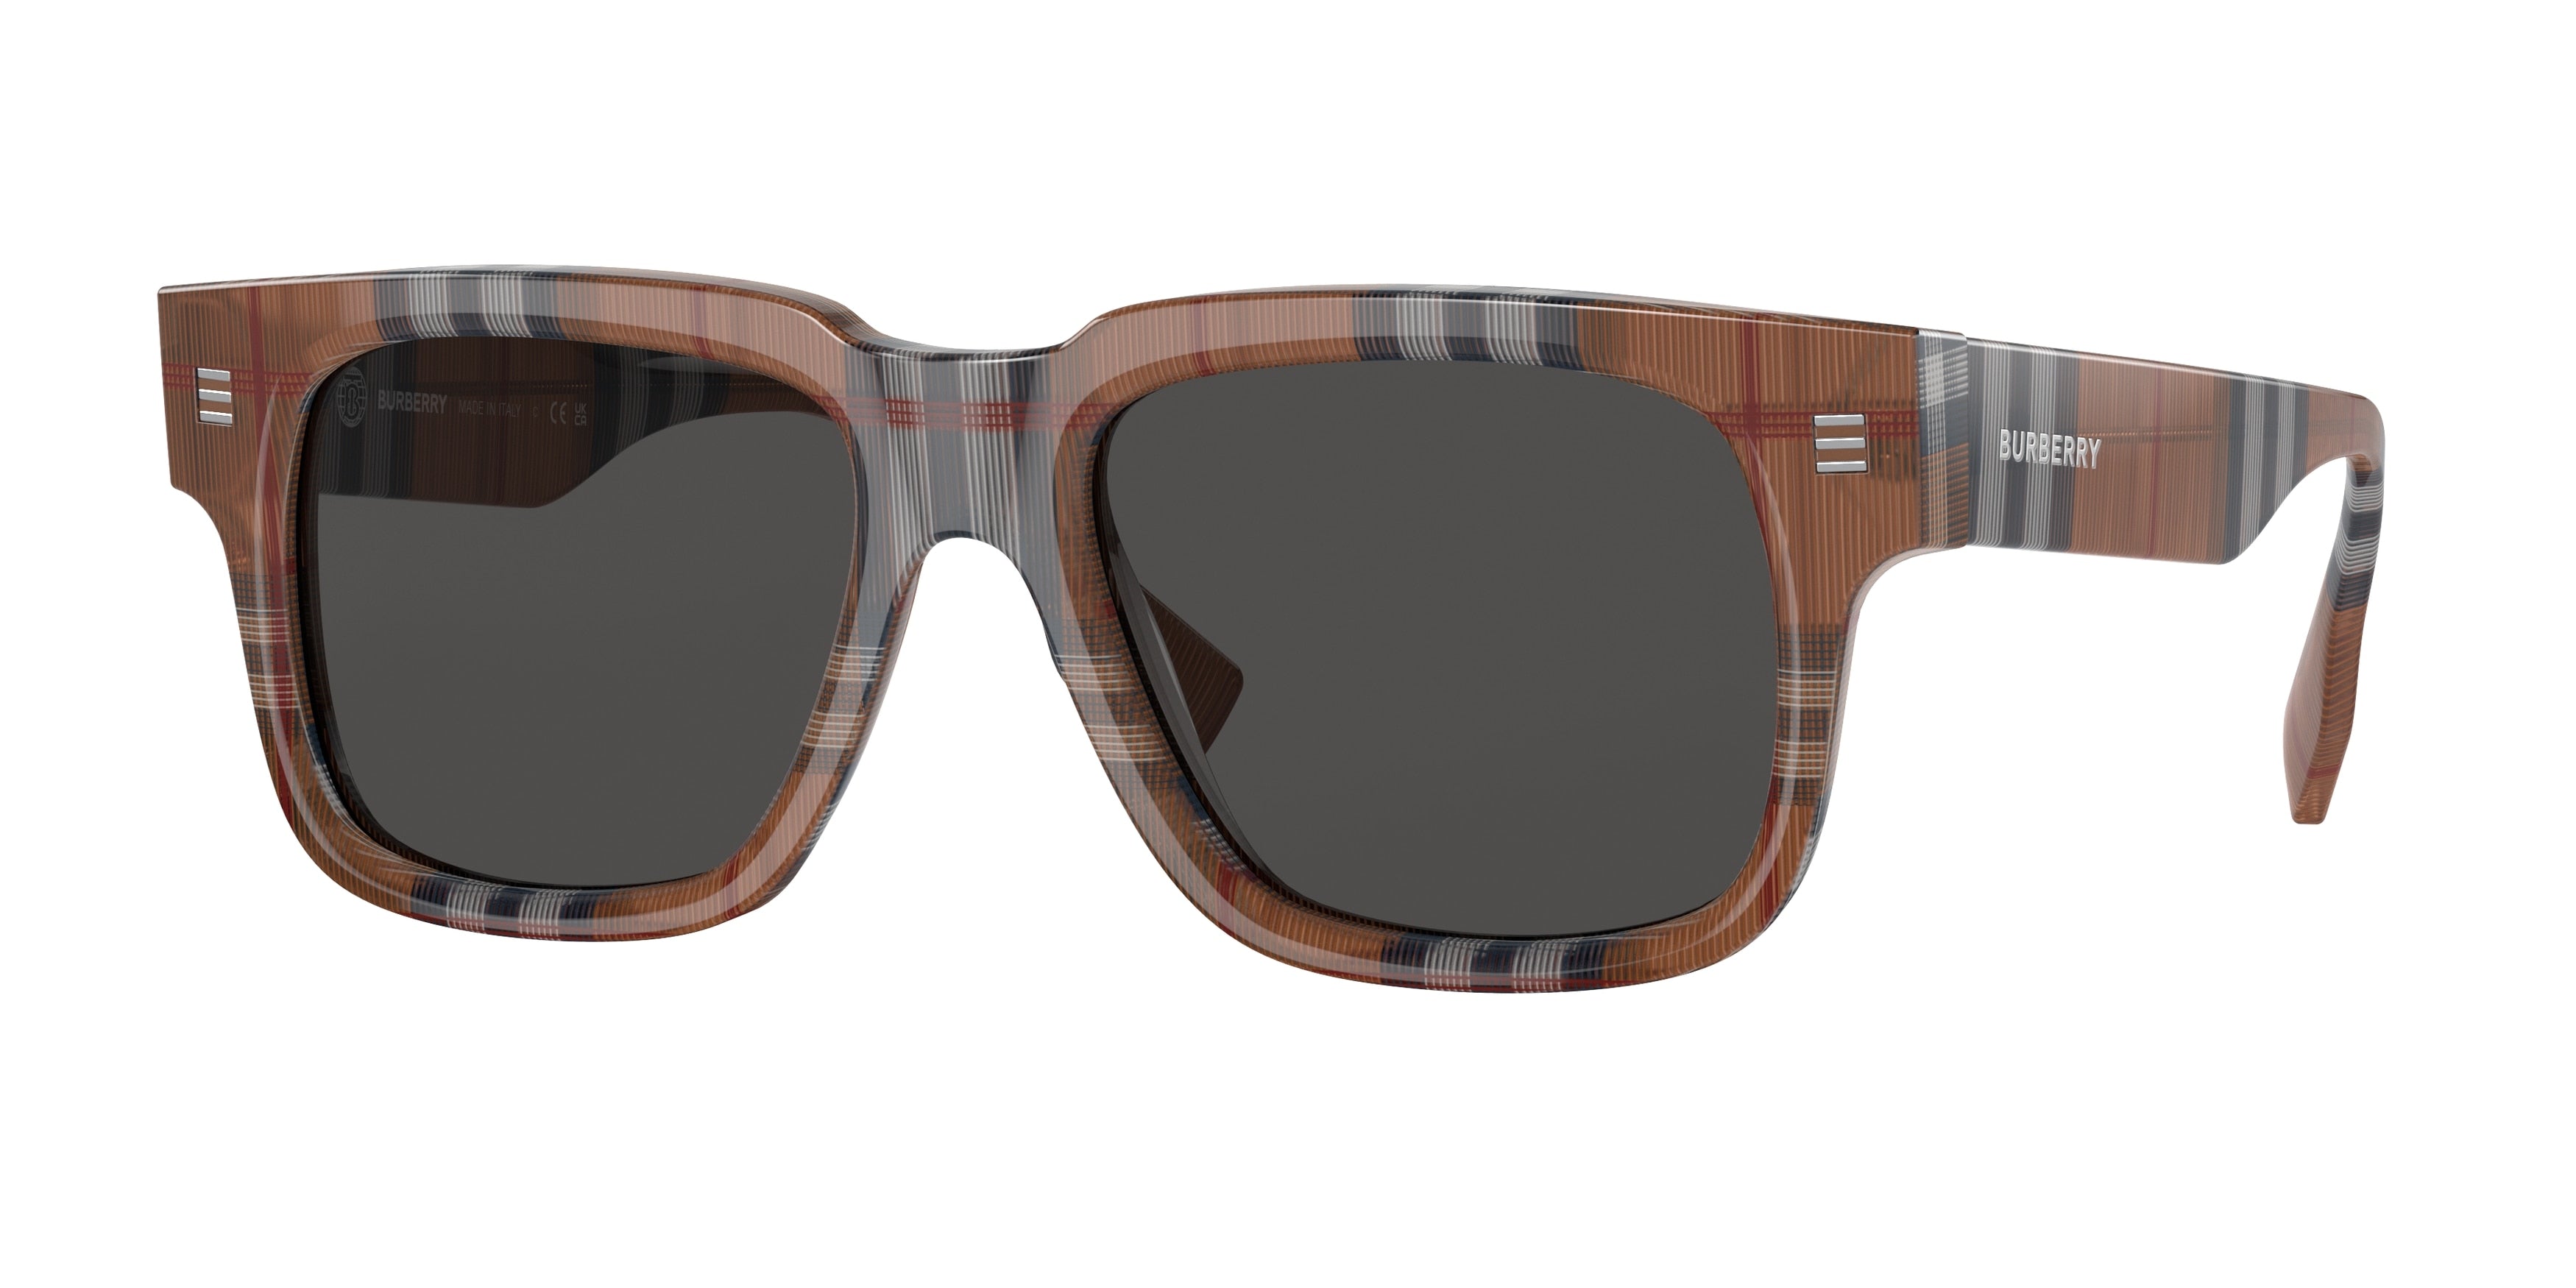 Burberry HAYDEN BE4394 Square Sunglasses  396687-Check Brown 54-150-18 - Color Map Brown